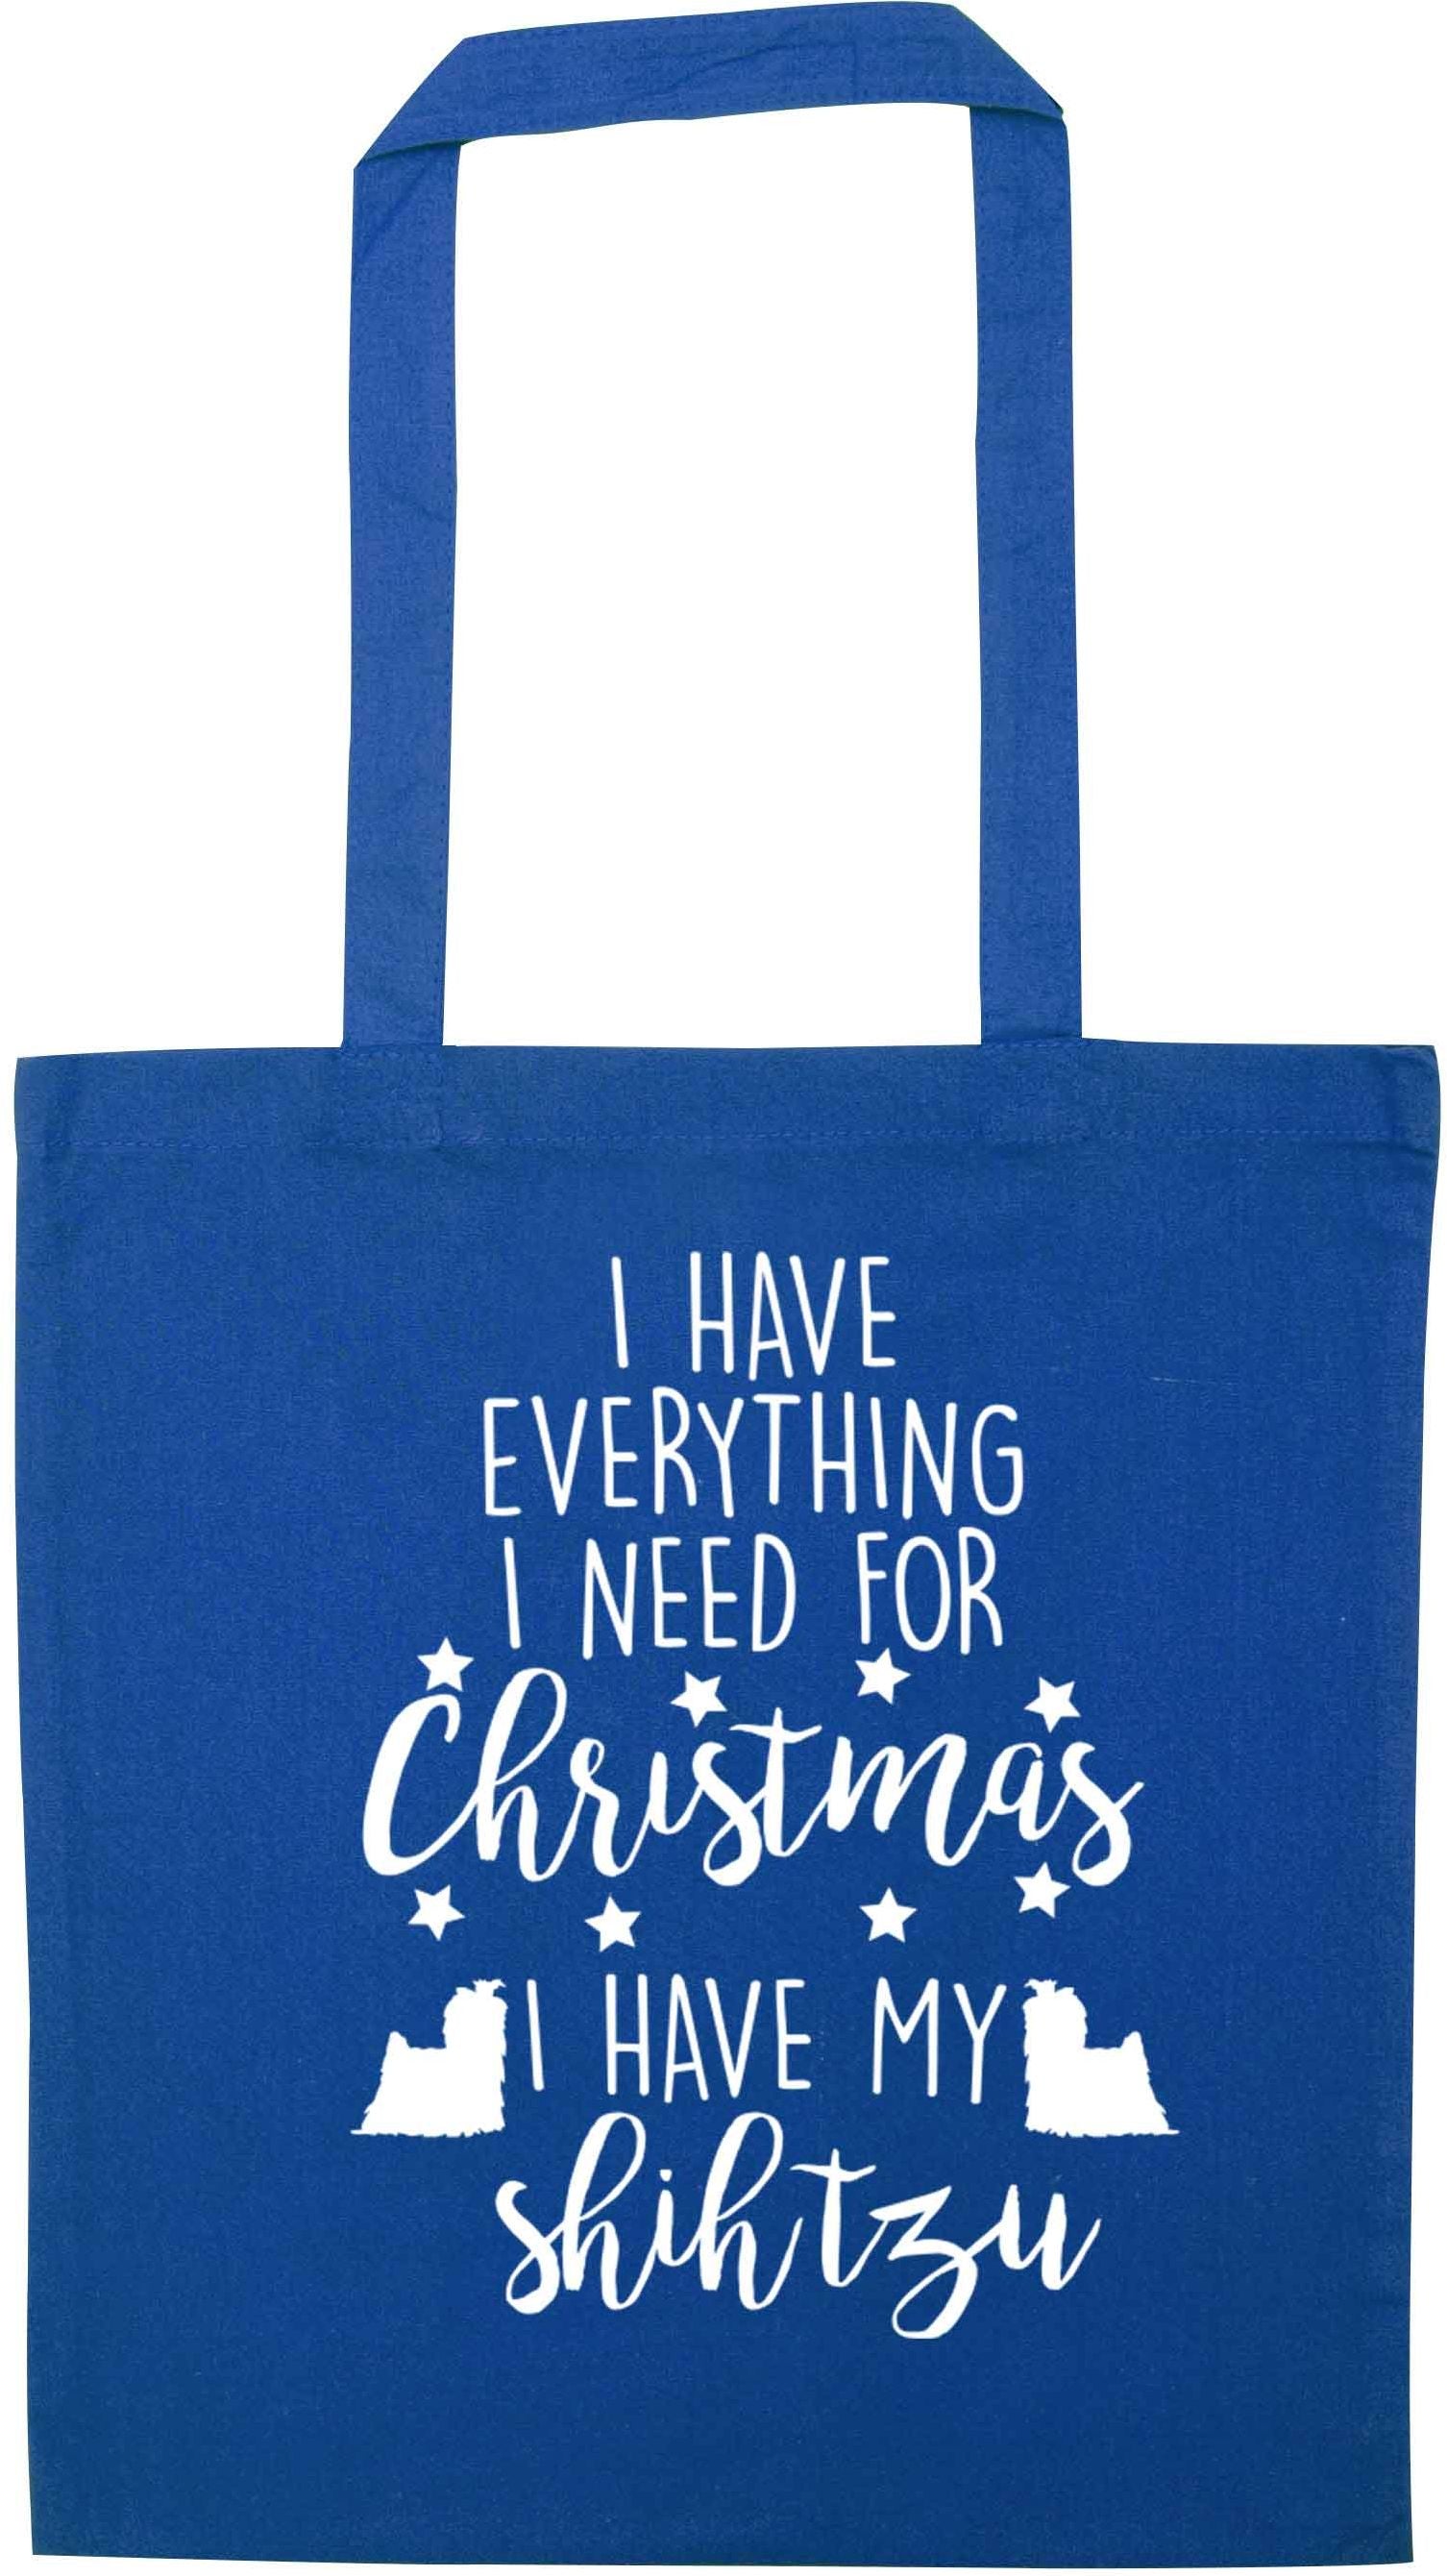 I have everything I need for Christmas I have my shih tzu blue tote bag